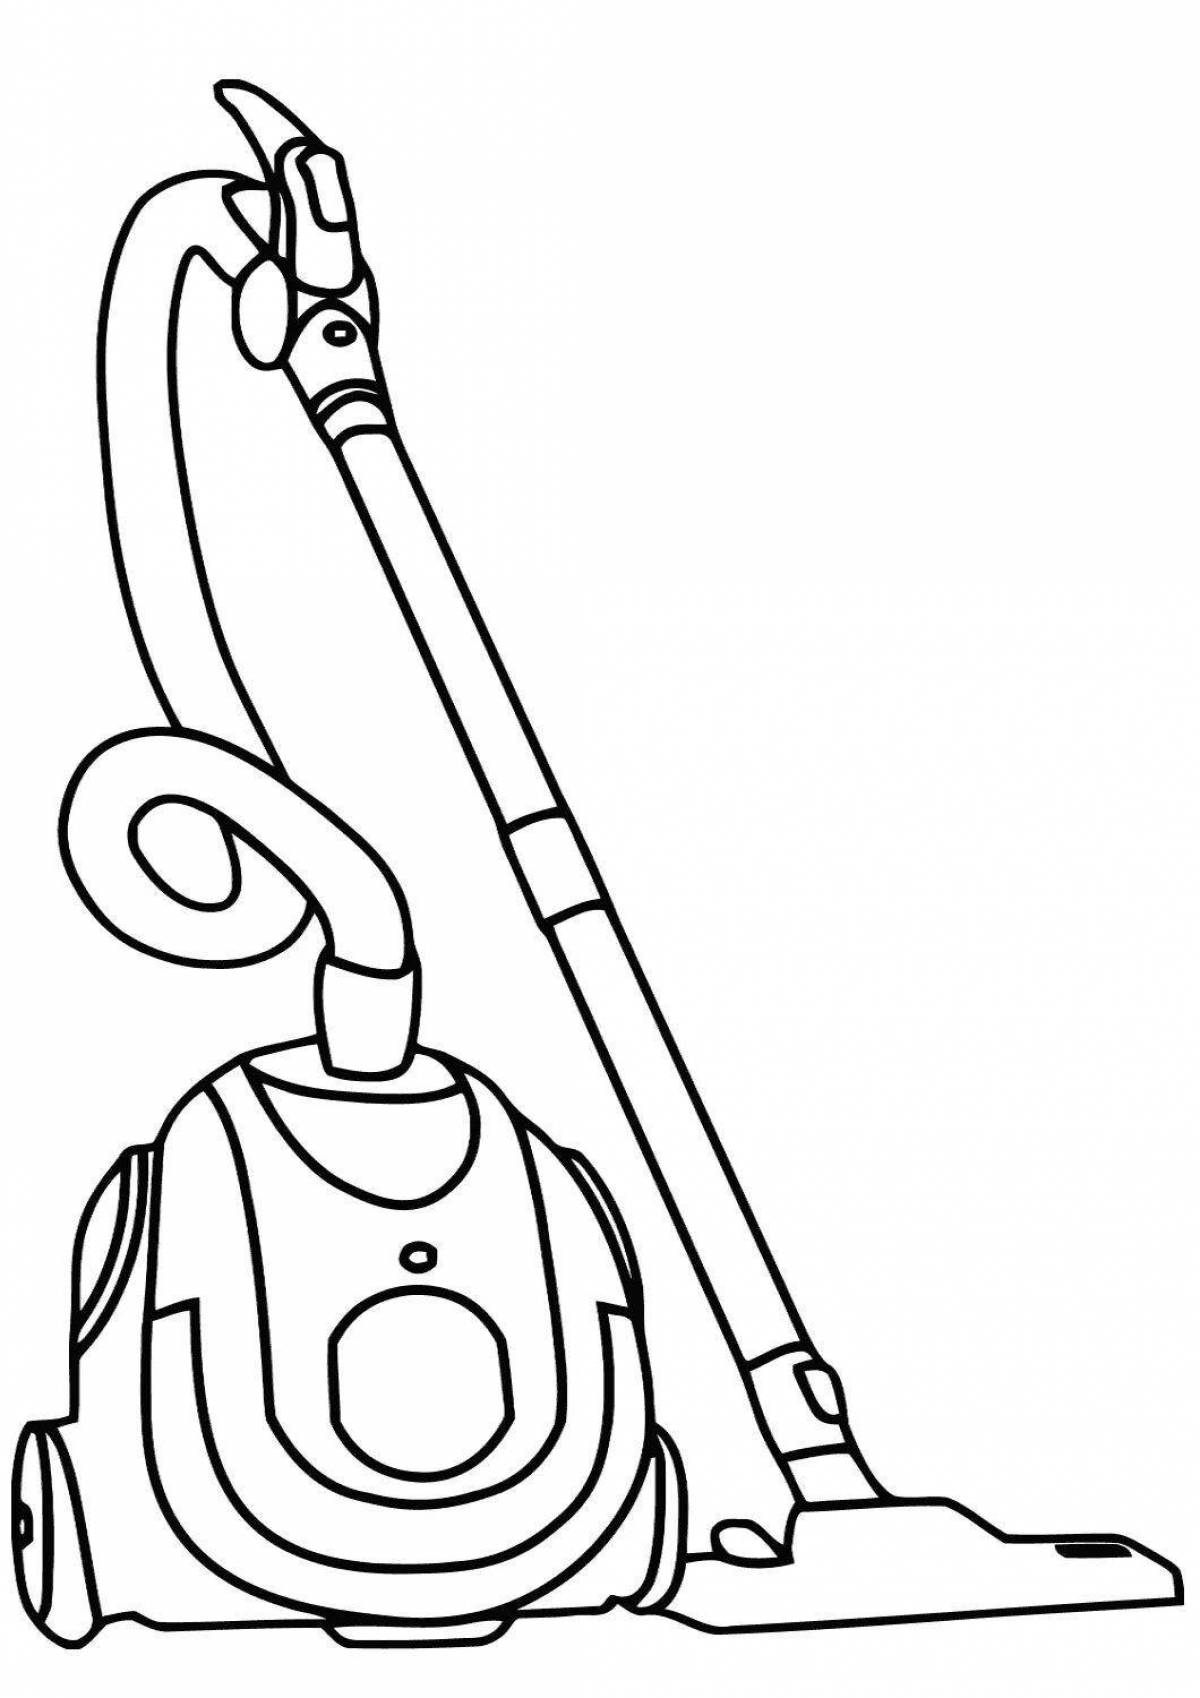 Crazy Robot Vacuum Cleaner Coloring Page